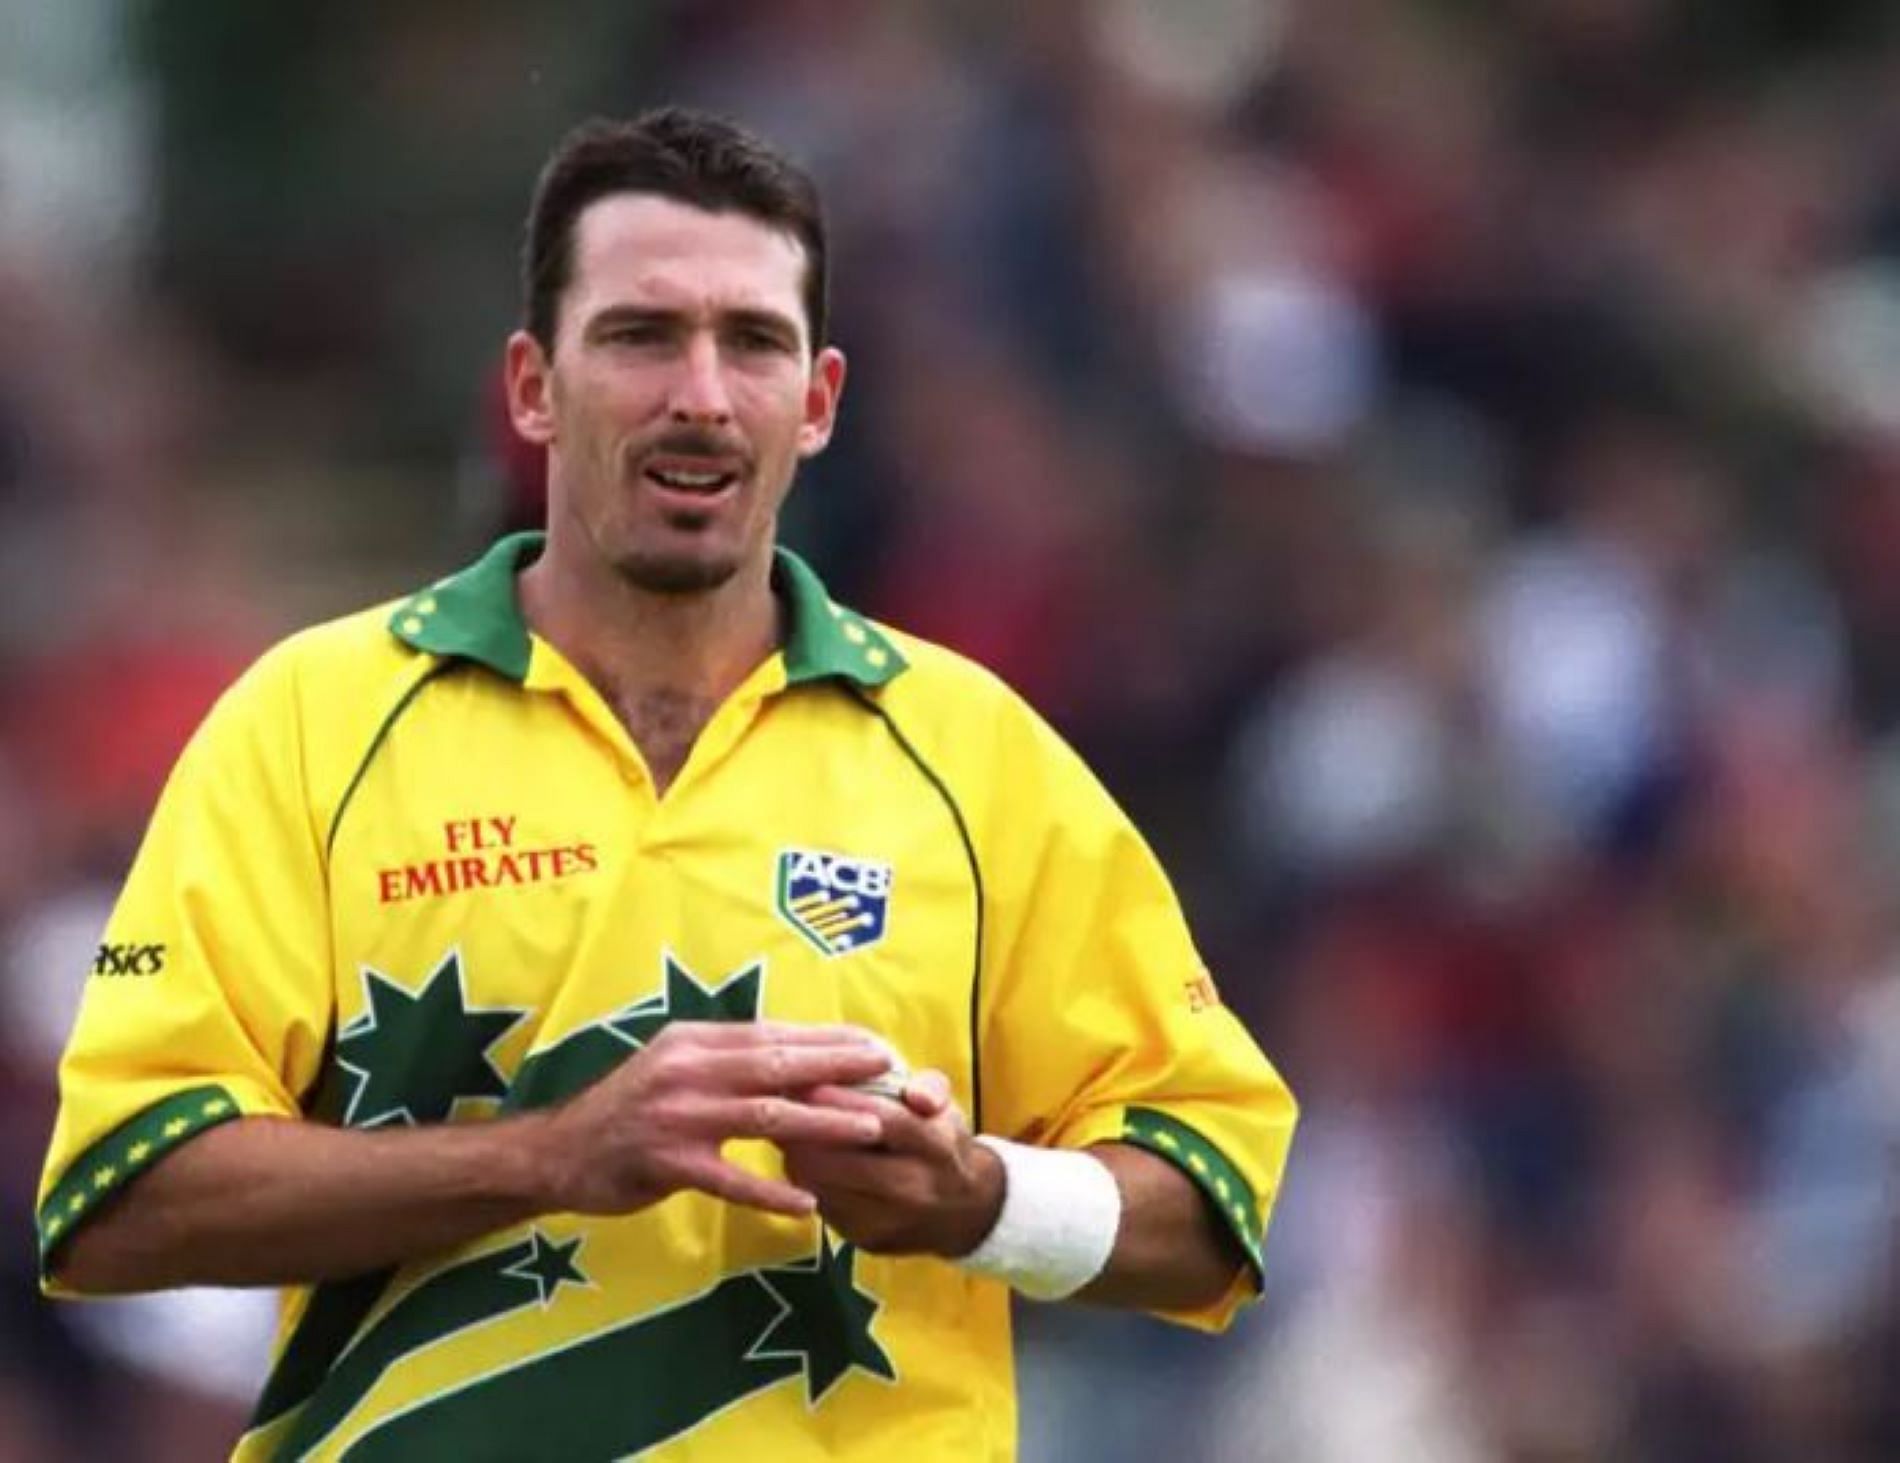 Fleming was among the most underrated bowlers of the late 1990s.